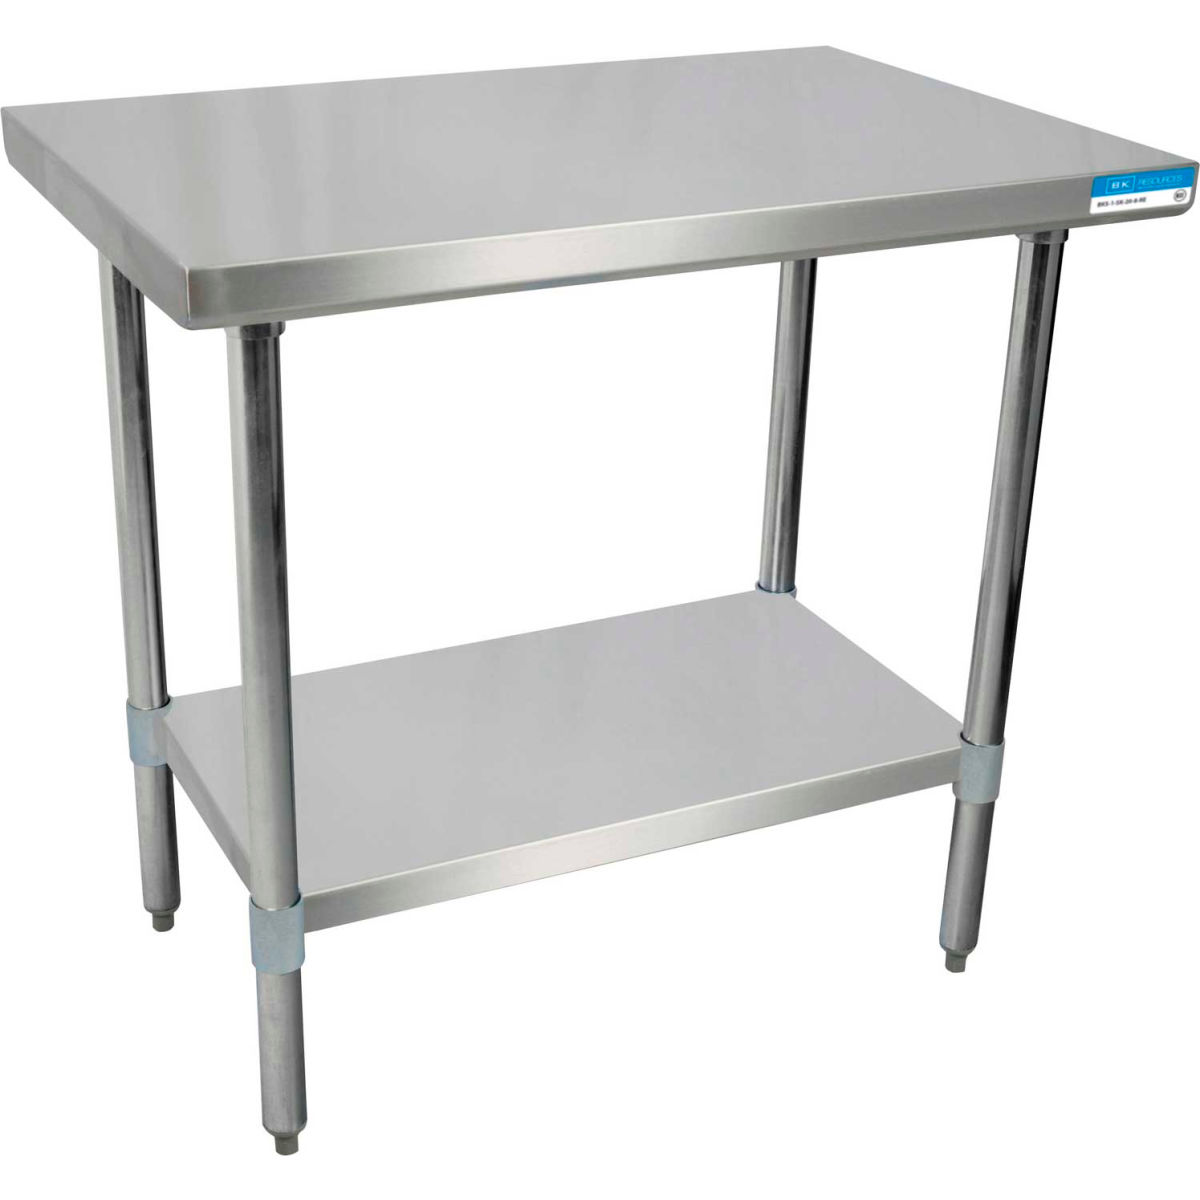 Picture of BK Resources B1516235 18 Gauge 430 Series Stainless Workbench with Undershelf - 48 x 18 in.